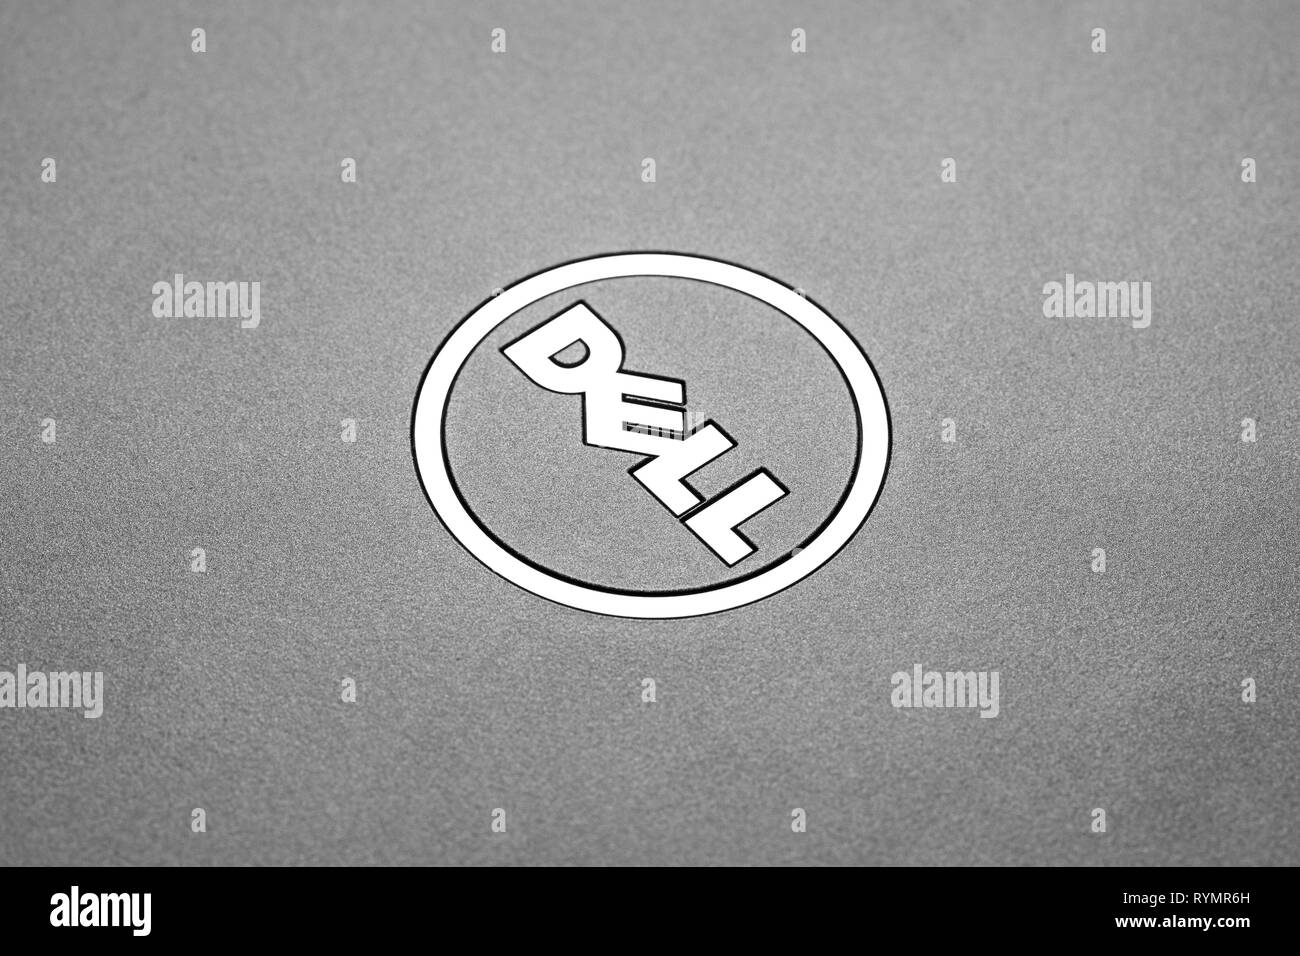 A Dell logo on a silver laptop. Dell is an American technology company based in Texas that makes computer products that are sent worldwide. Stock Photo